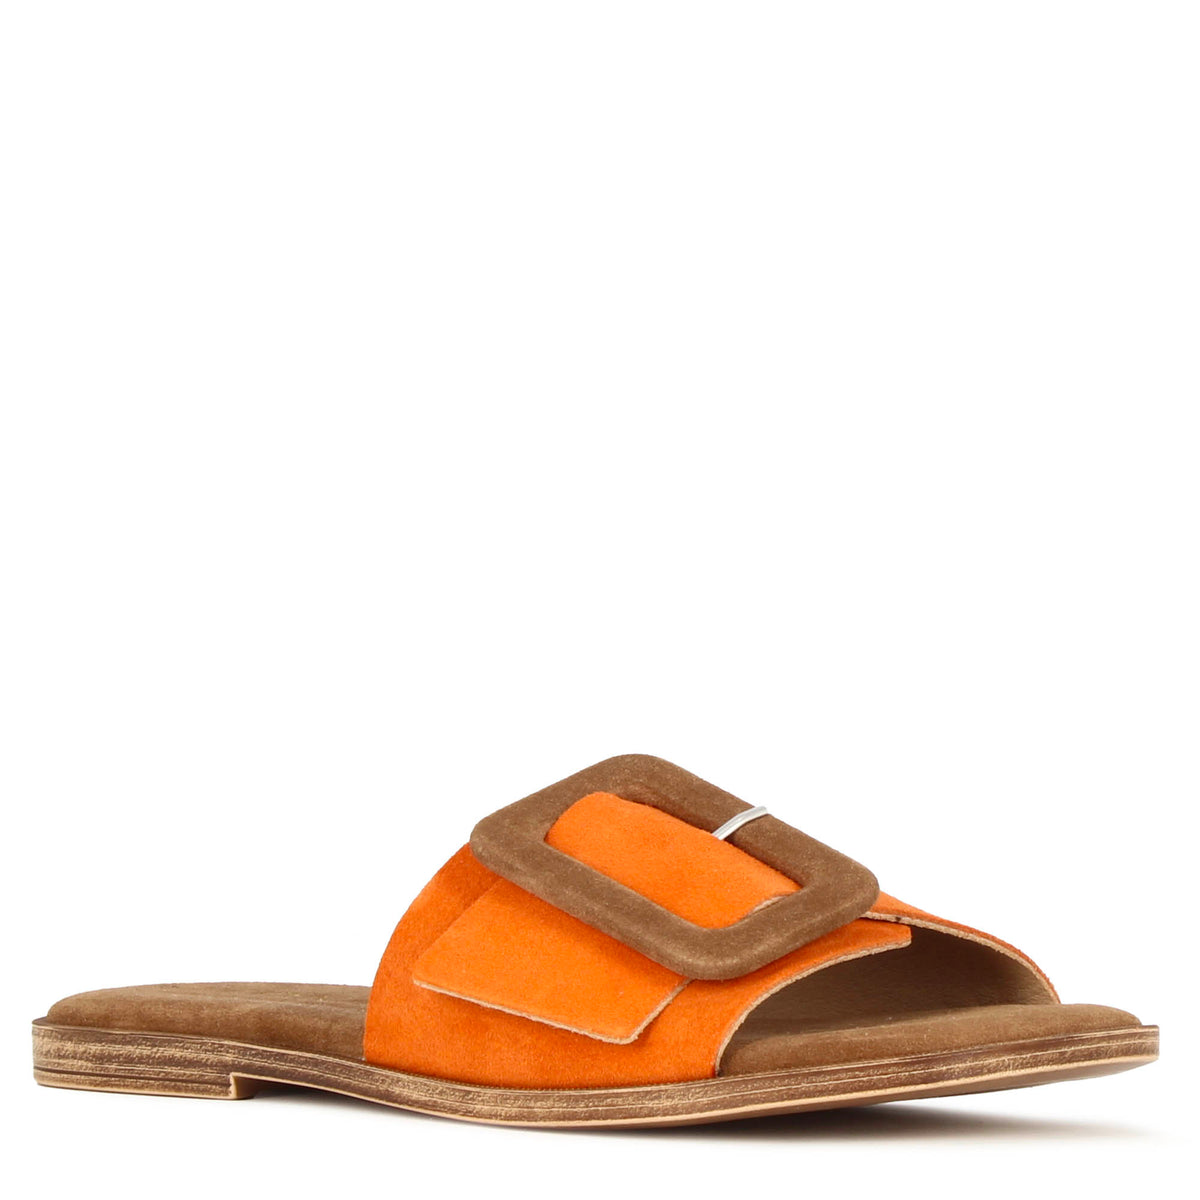 Women's orange and brown suede slippers